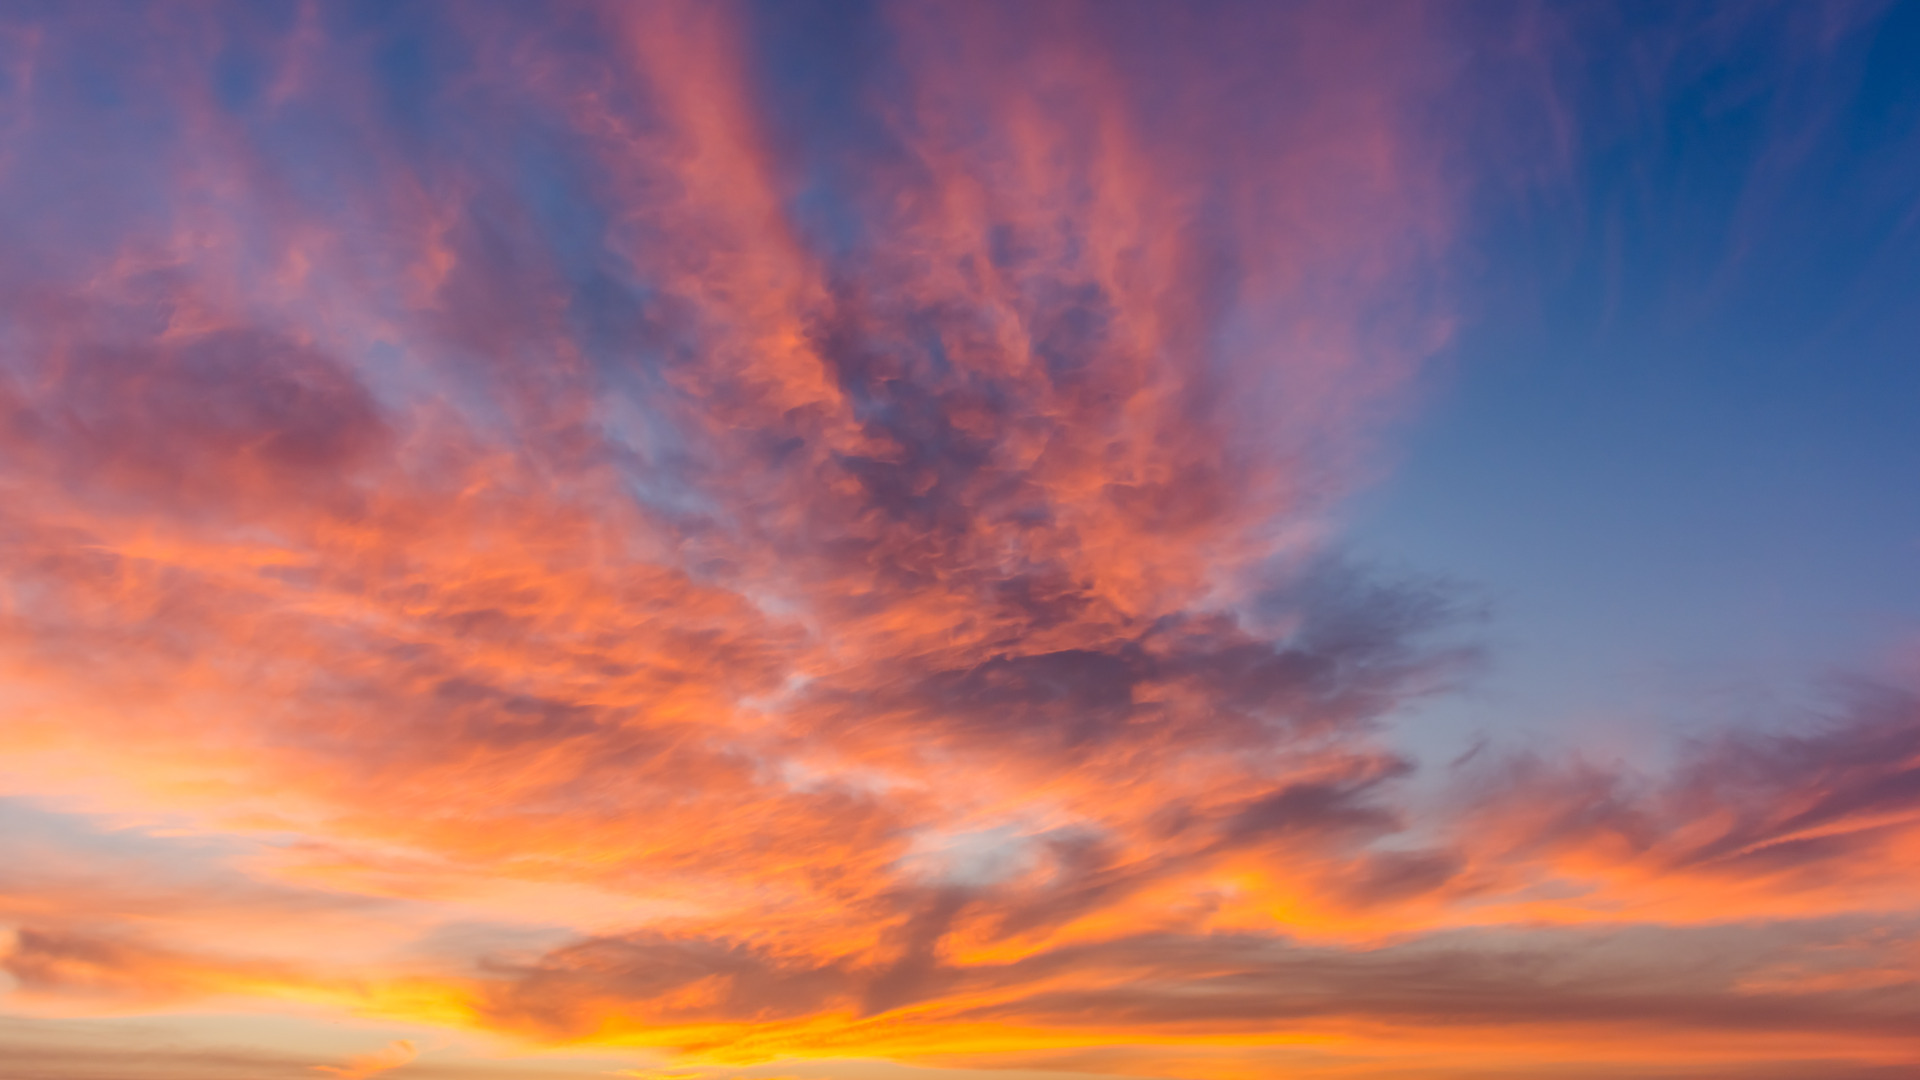 Download wallpaper the sky, clouds, sunset, background, pink, colorful, sky,  sunset, pink, beautiful, section landscapes in resolution 1920x1080